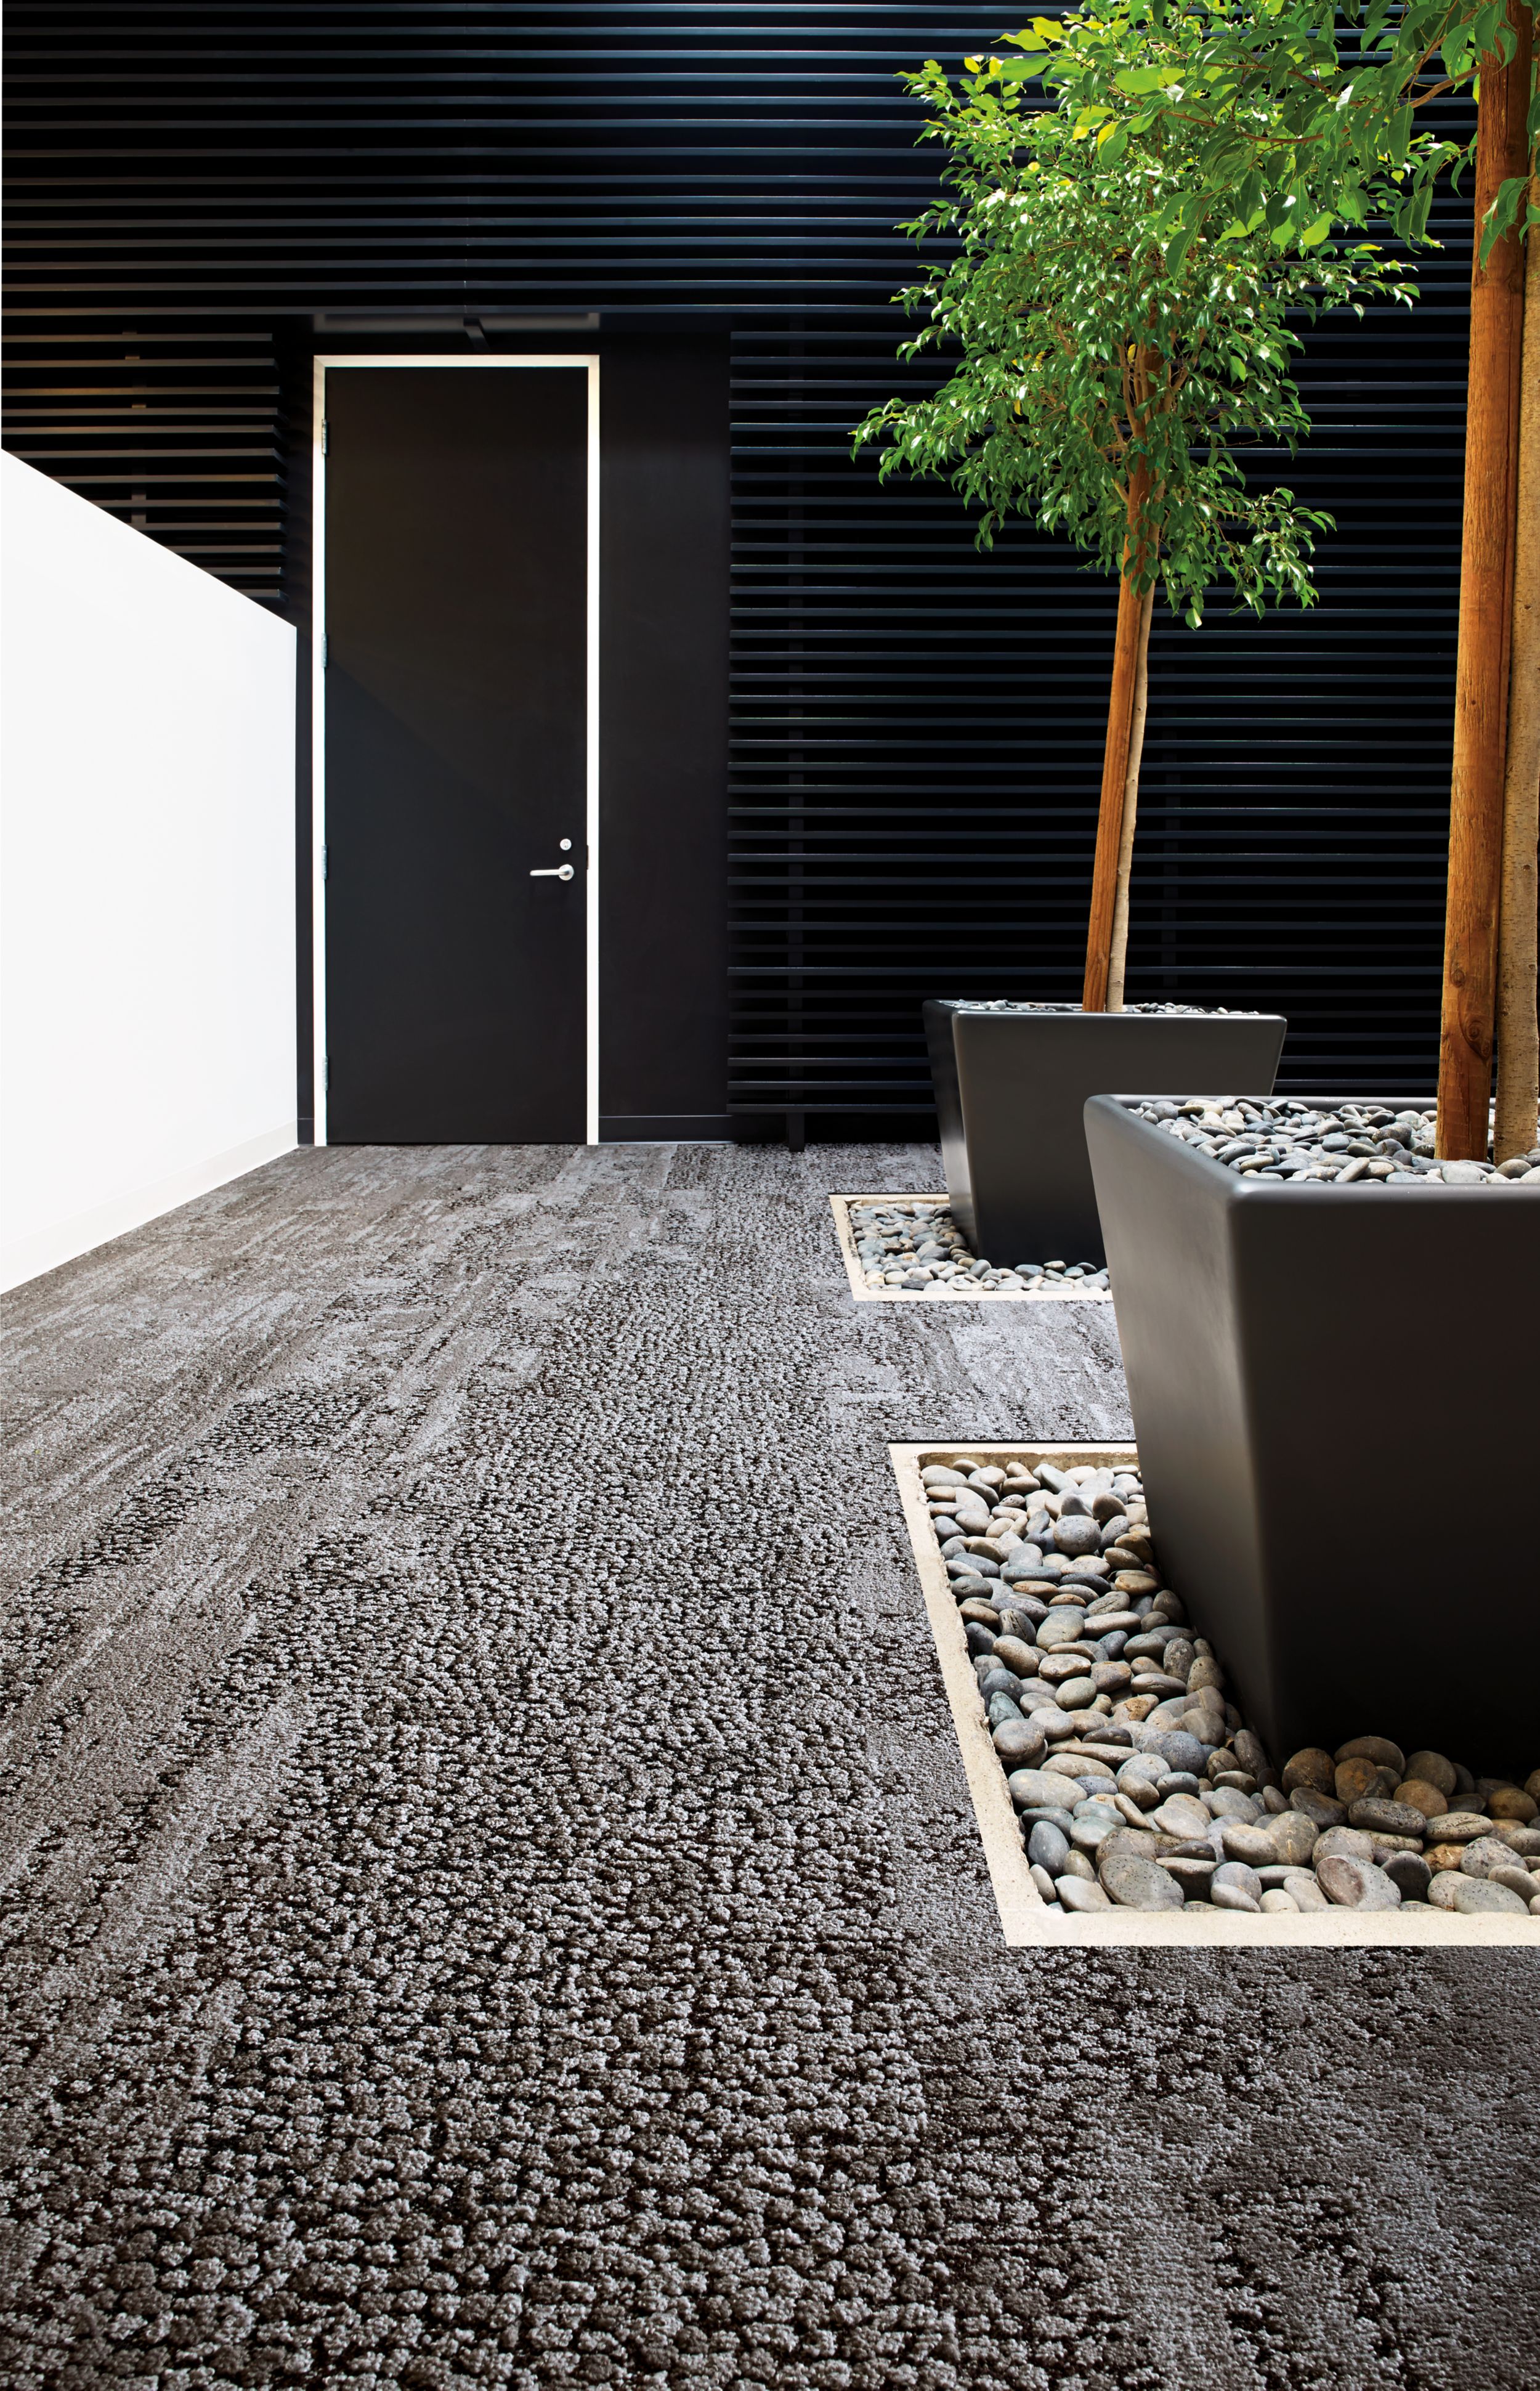 Interface HN810, HN820, HN840 and HN850 plank carpet tiles in white anc black room with potted trees and river rock imagen número 9